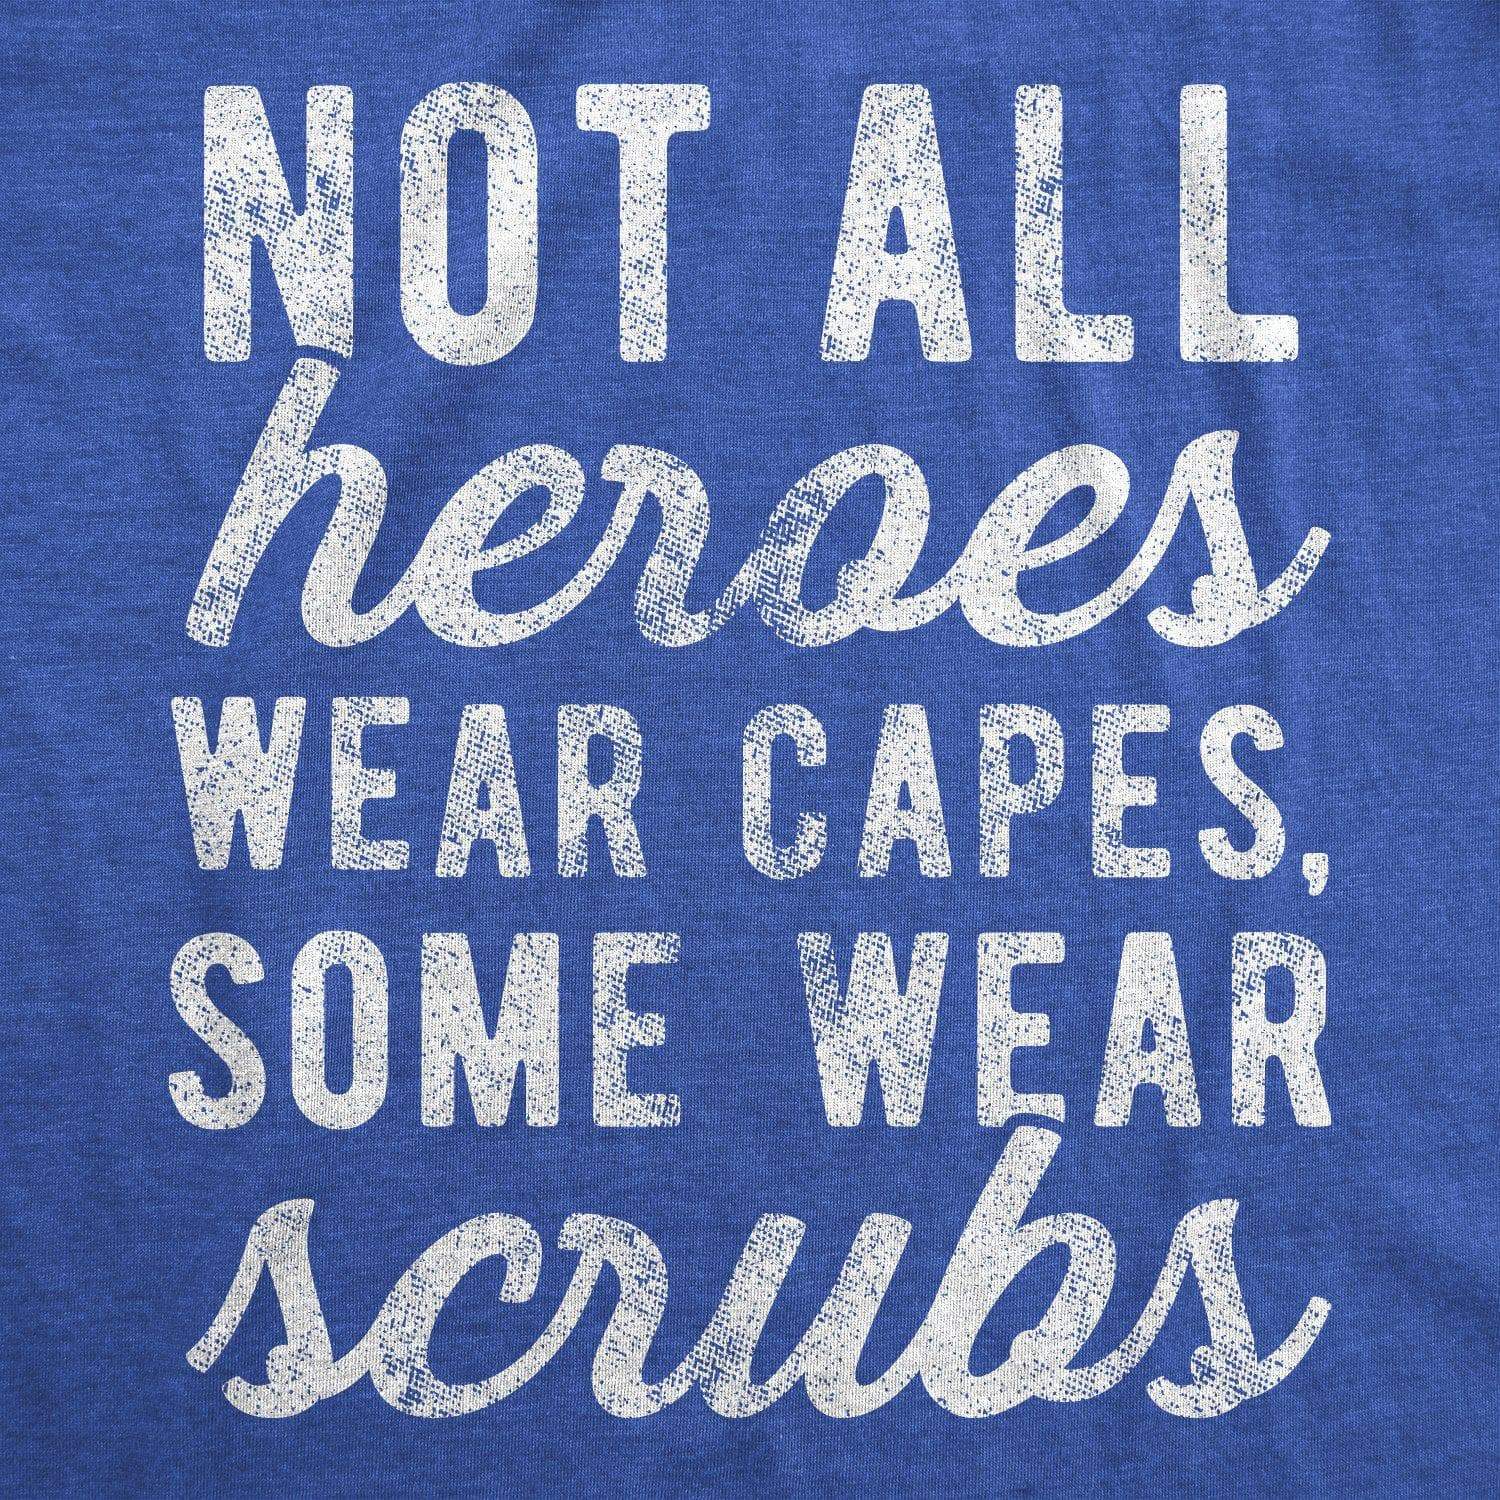 Not All Heroes Wear Capes Some Wear Scrubs Quarantine Men's Tshirt - Crazy Dog T-Shirts